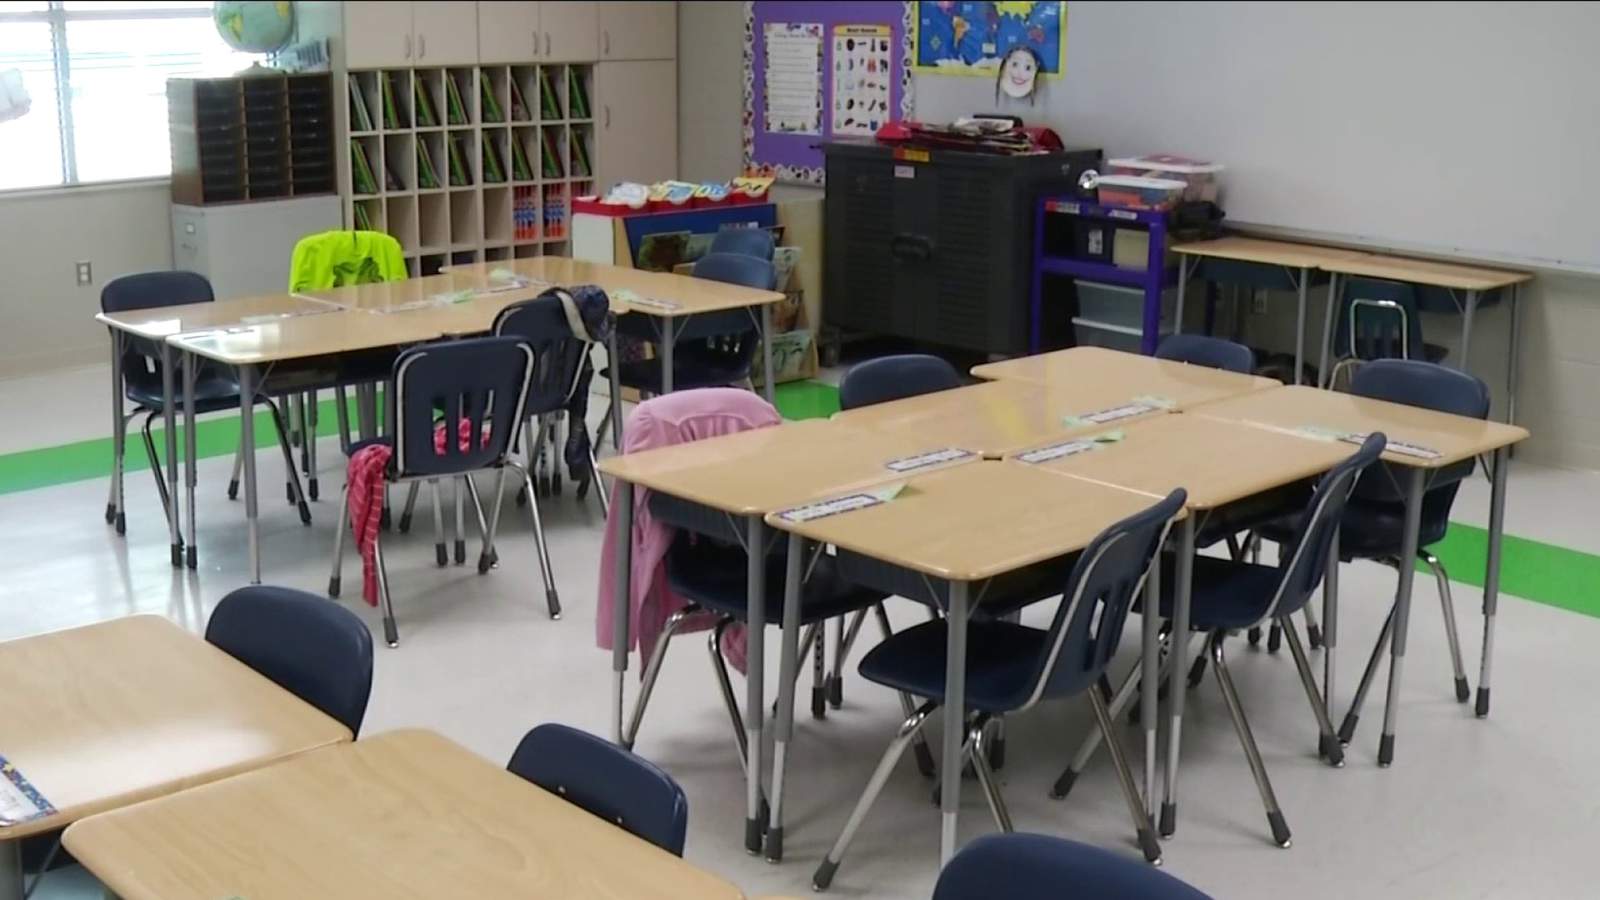 Roanoke school leaders say they’re on track for students to return to classrooms